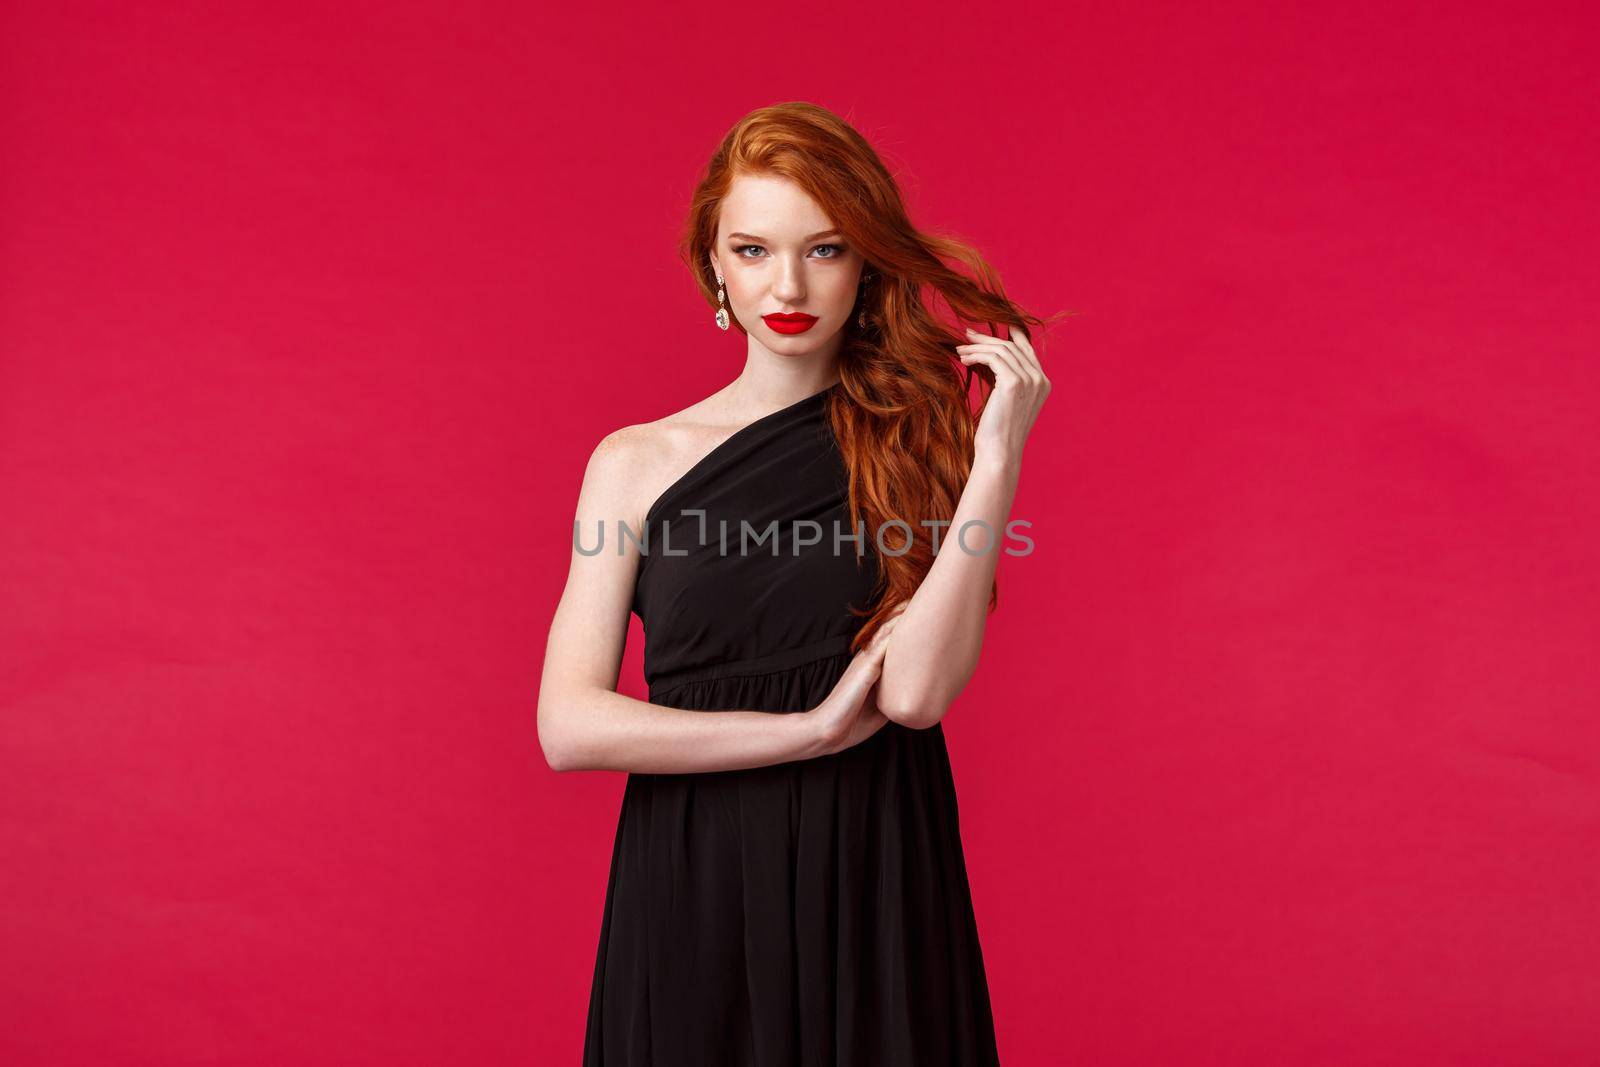 Elegance, fashion and woman concept. Seductive gorgeous redhead woman in black fashionable dress, attend formal event, party or prom, look assertive and determined, know what she wants.